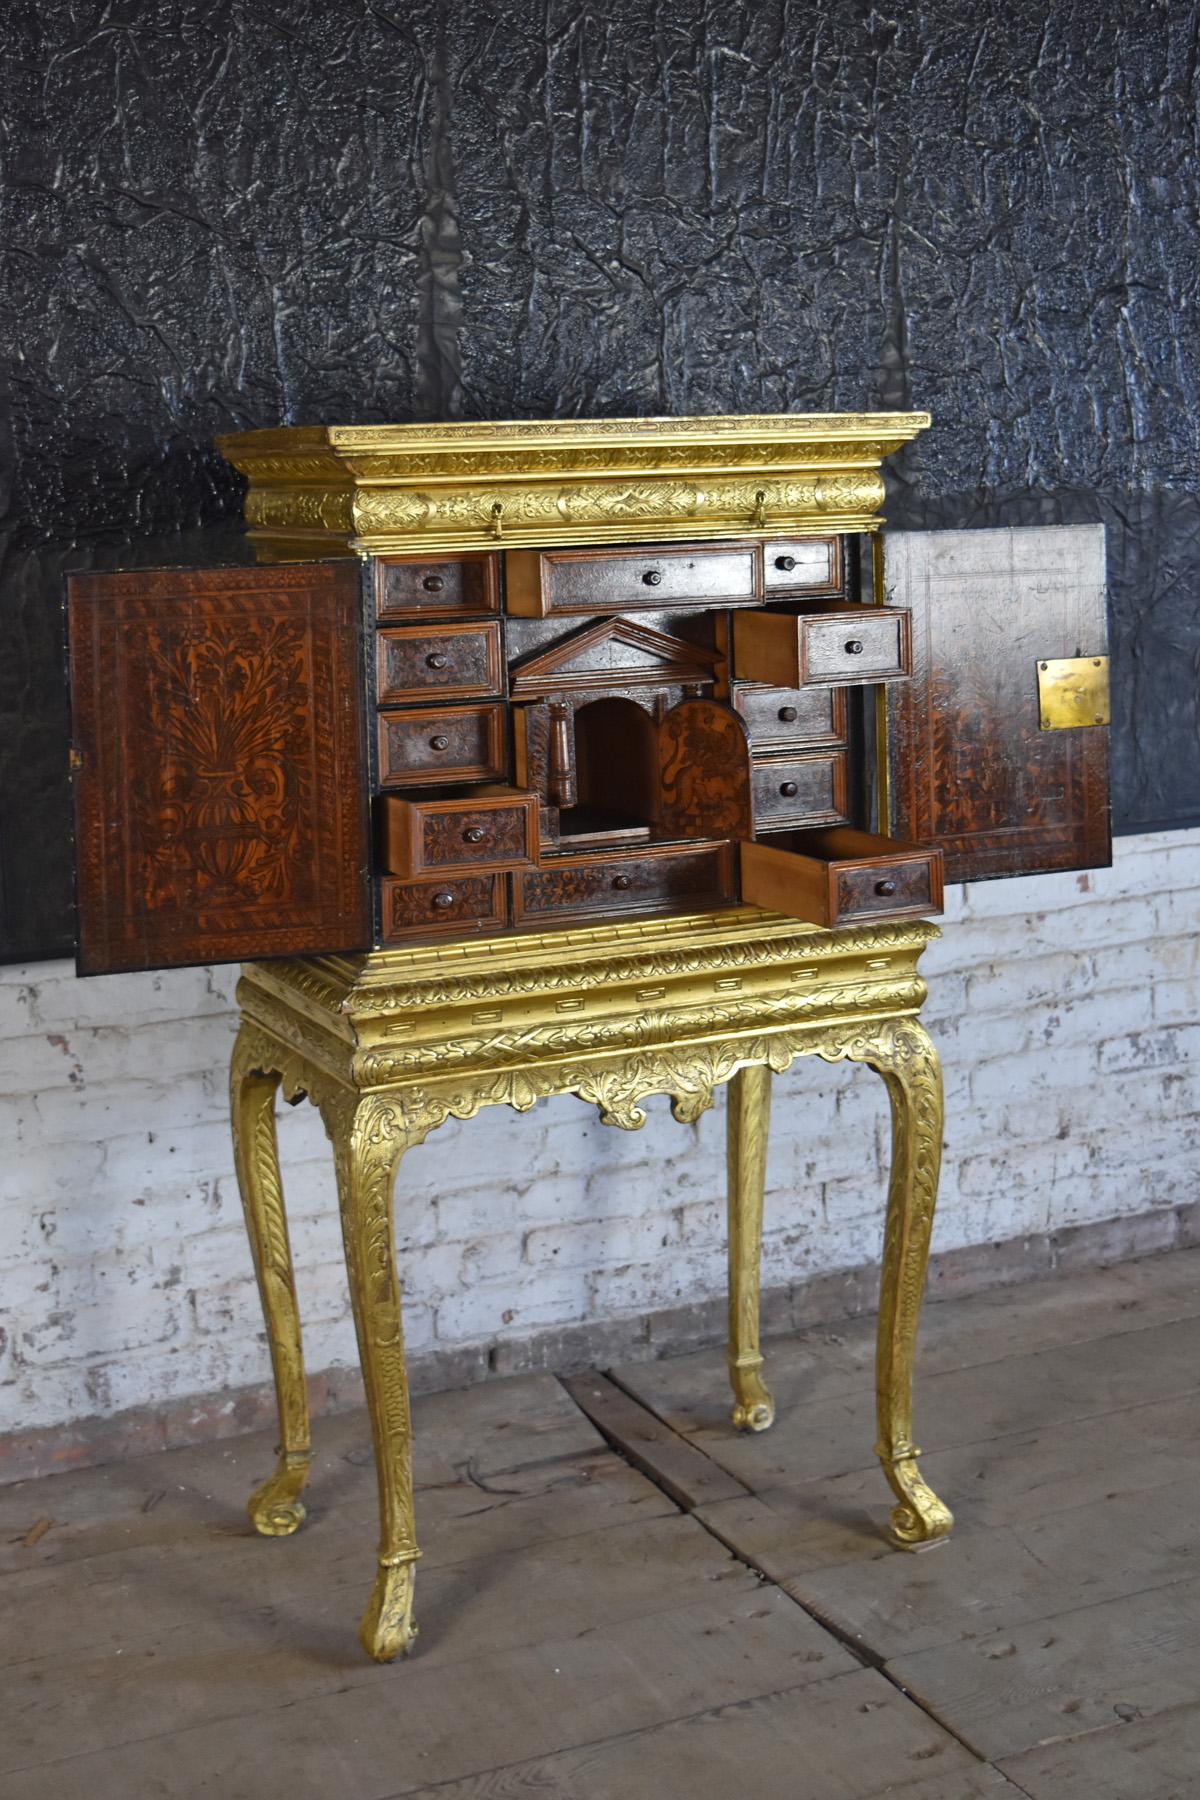 Petit, very decorative English gilt cabinet on stand, with an Italian 17th century poker-work interior featuring an intricate system of drawers, including numerous hidden ones. Reconfigured in the 19th century. The perfect jewelry cabinet.
The